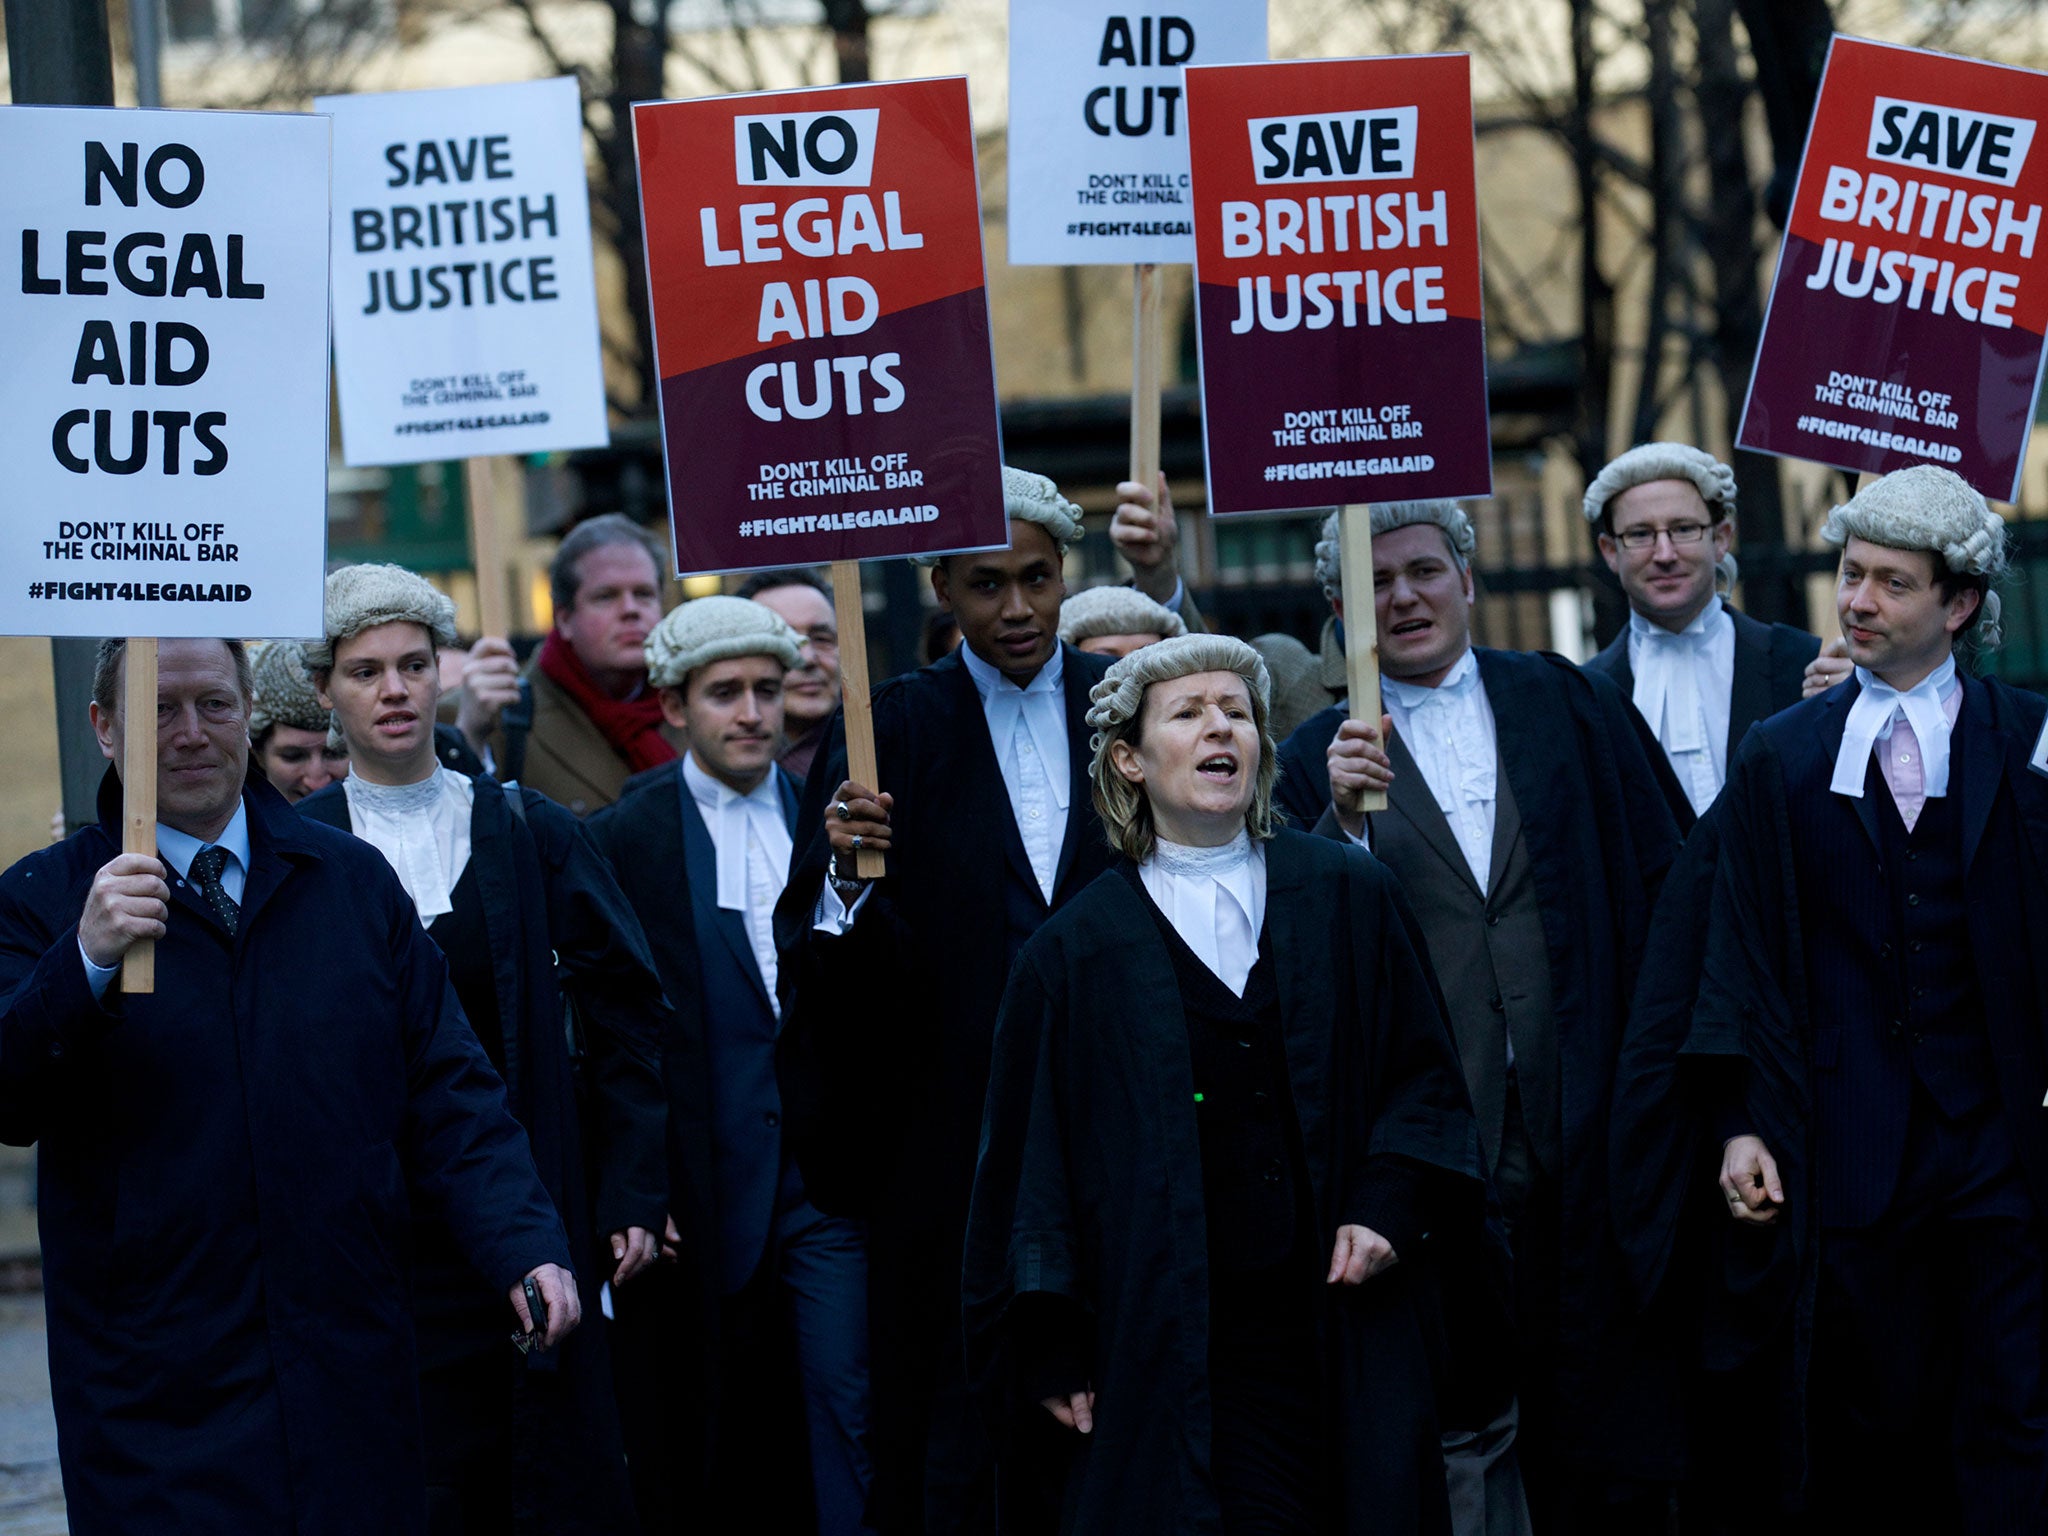 Barristers have been protesting against legal aid cuts for five years